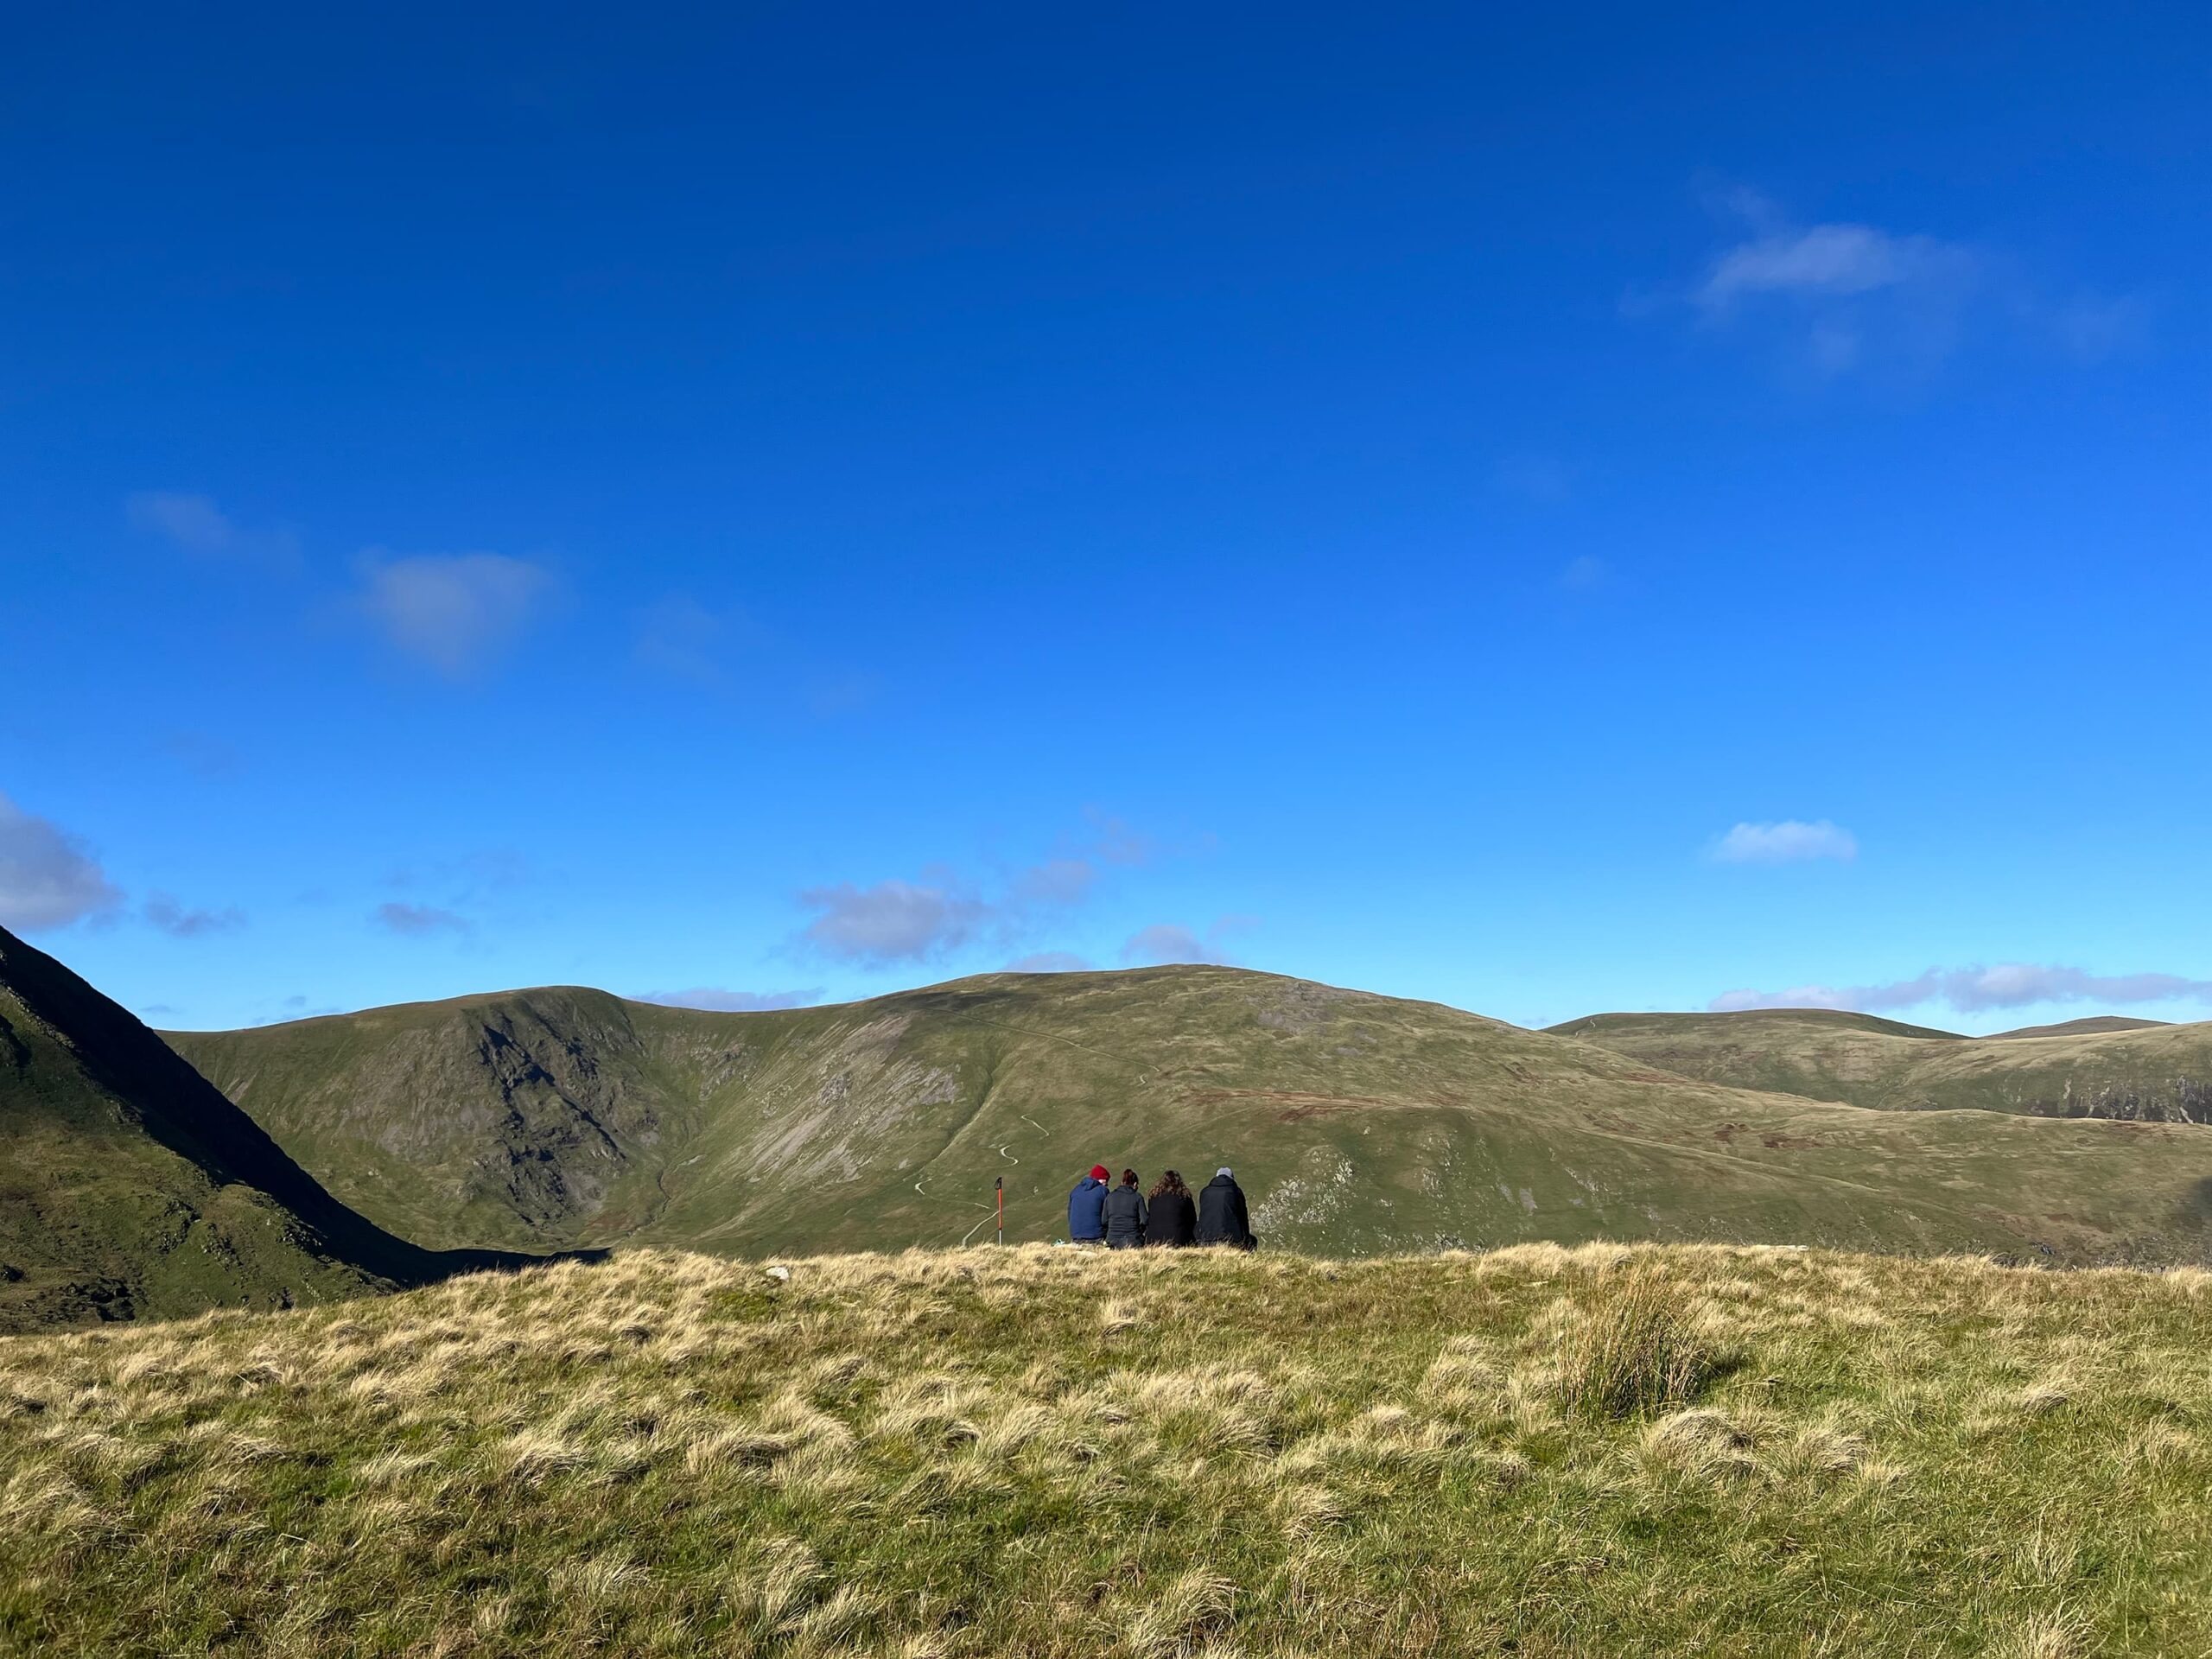 A group of four hillwalkers on Striding Edge taking a break enjoying the views. There's a walking pole to the right of them.